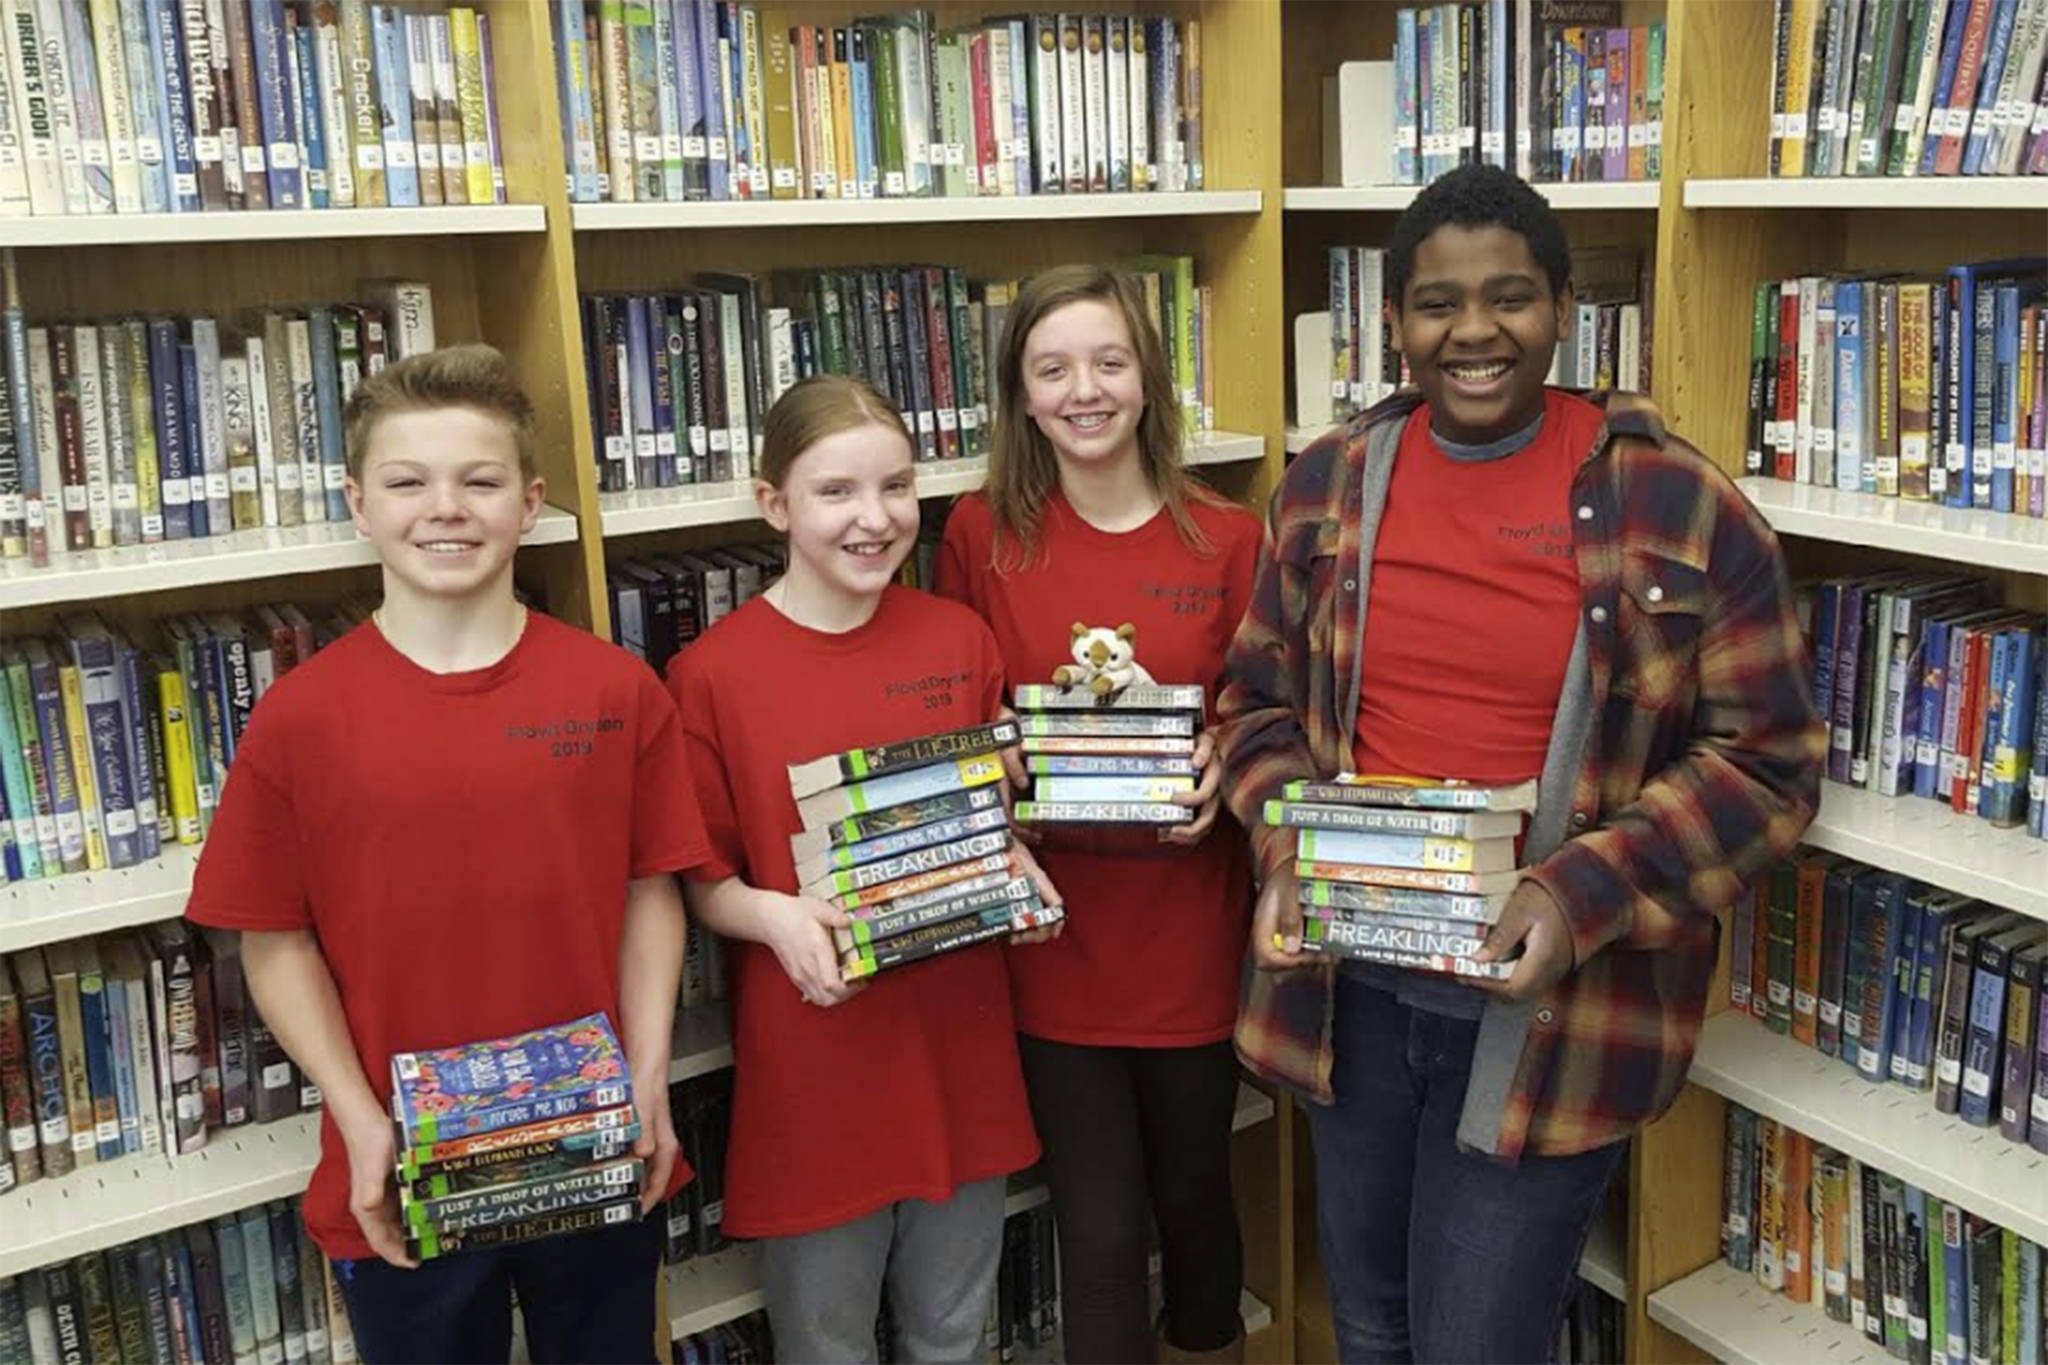 Middle school team wins Battle of the Books state championship